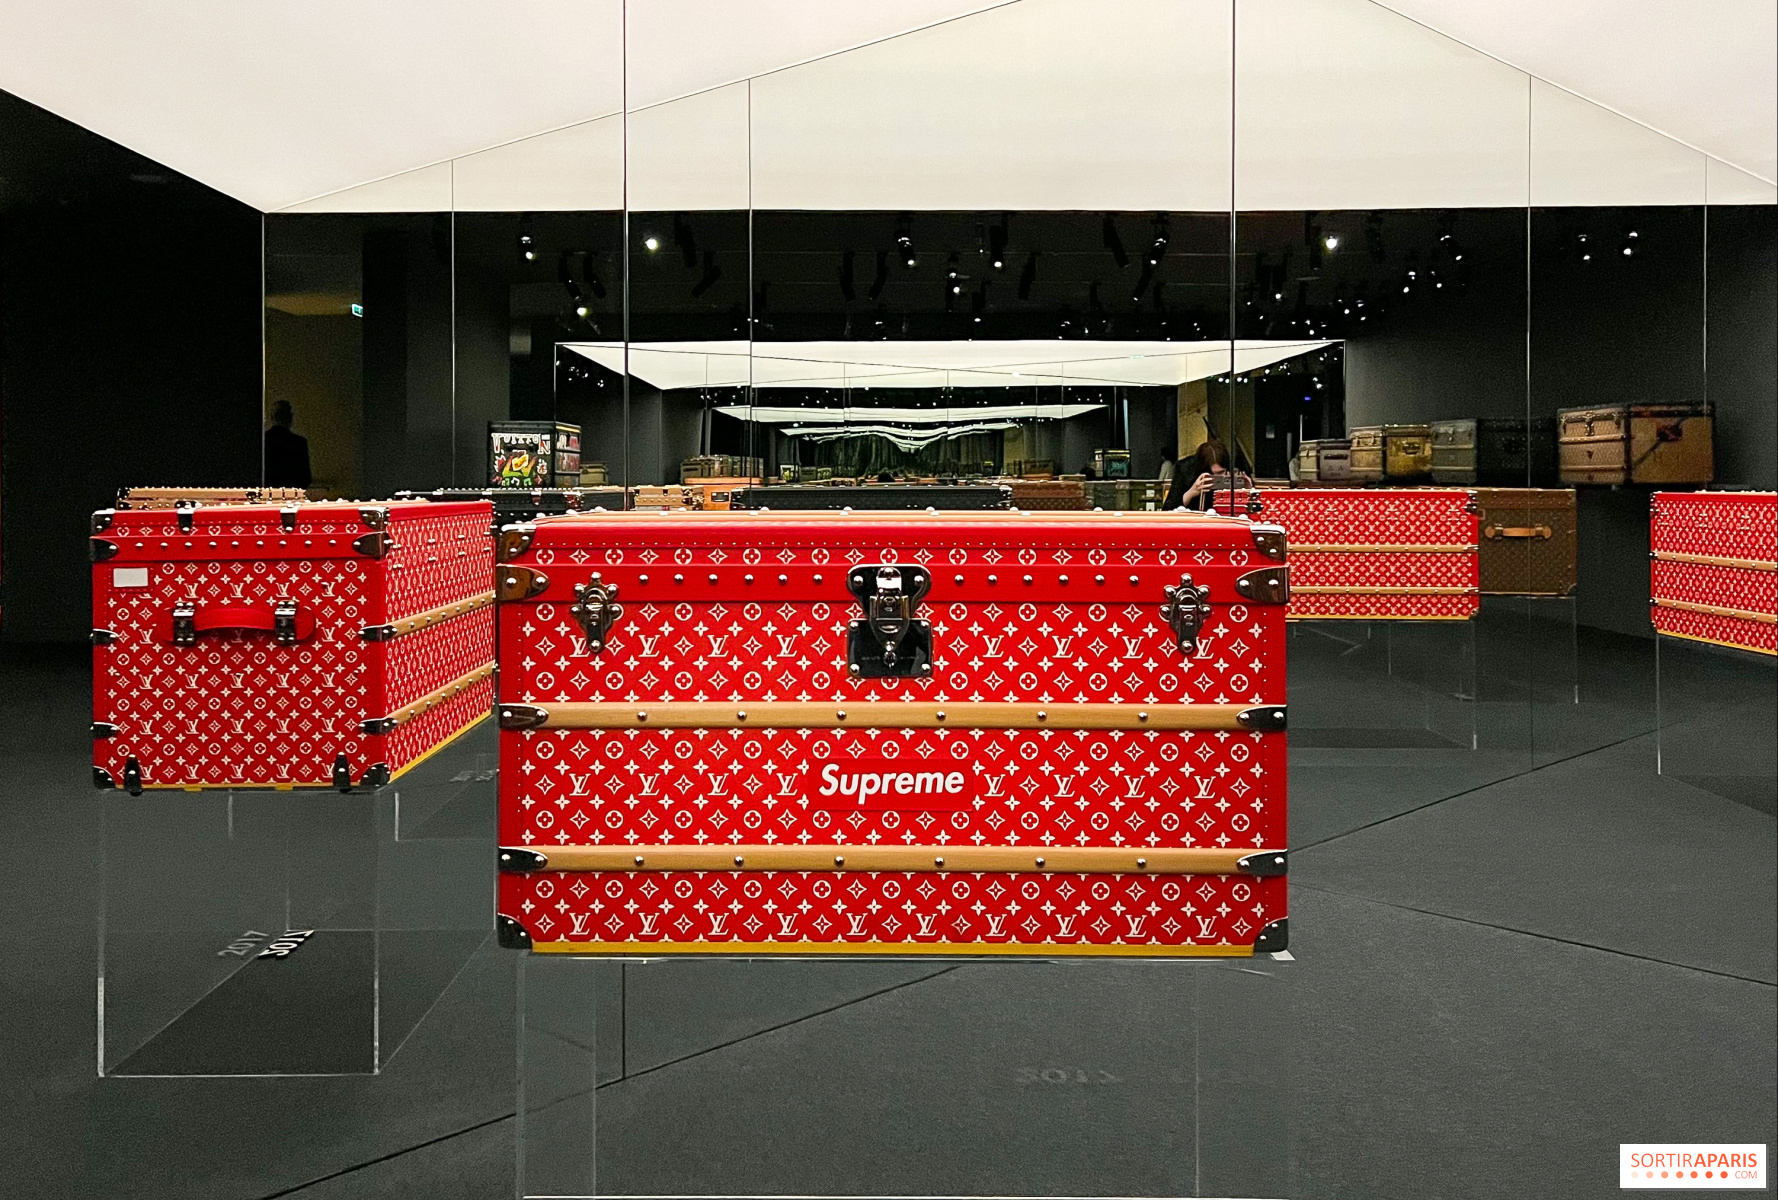 La Malle Courrier: the new free exhibition from Maison Louis Vuitton that  invites you to travel 